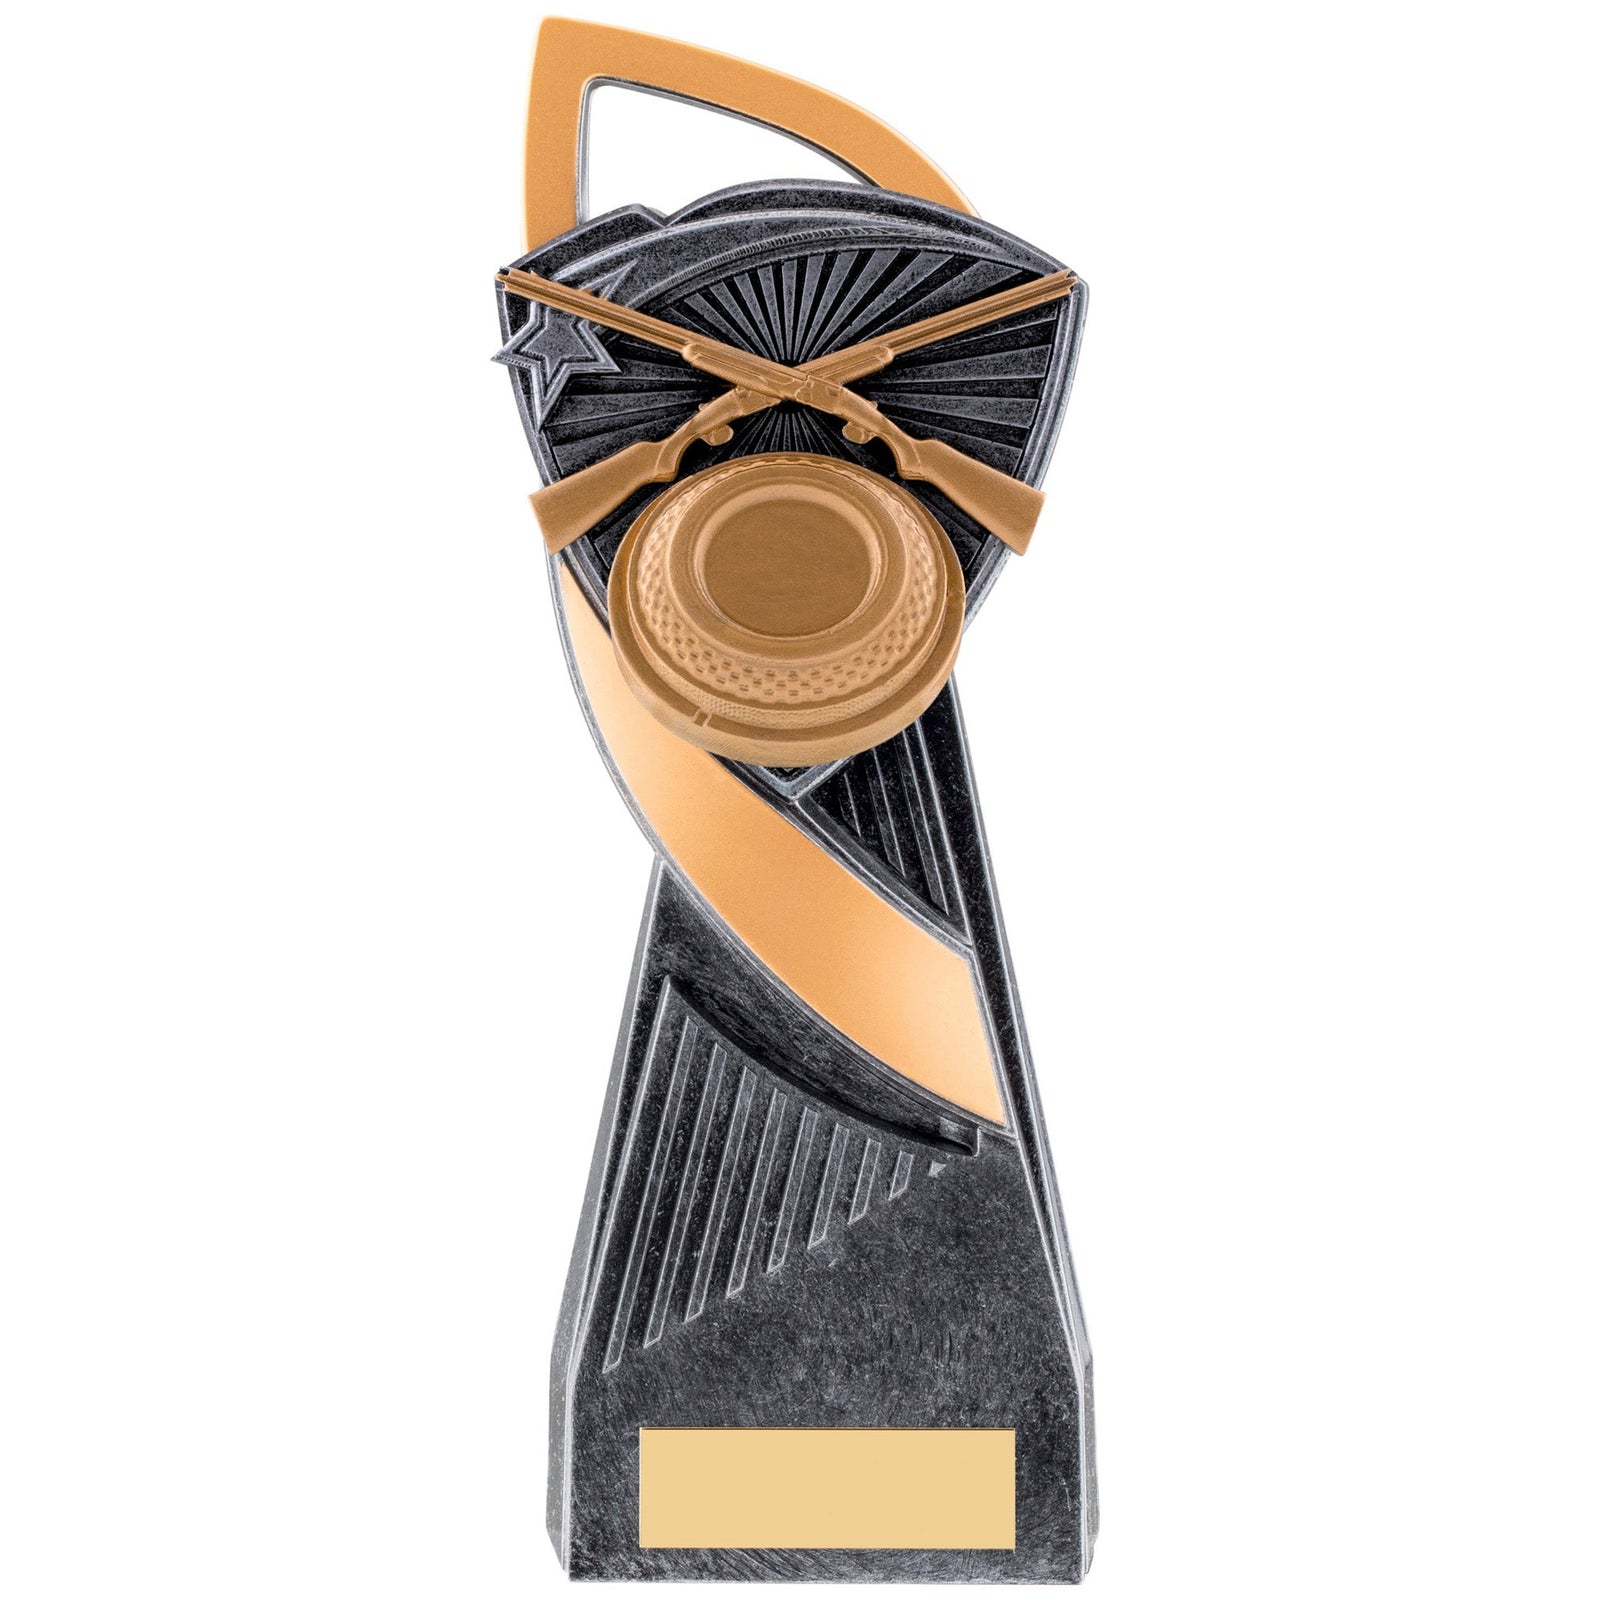 Utopia Clay Shooting Trophy (Gold/Silver)